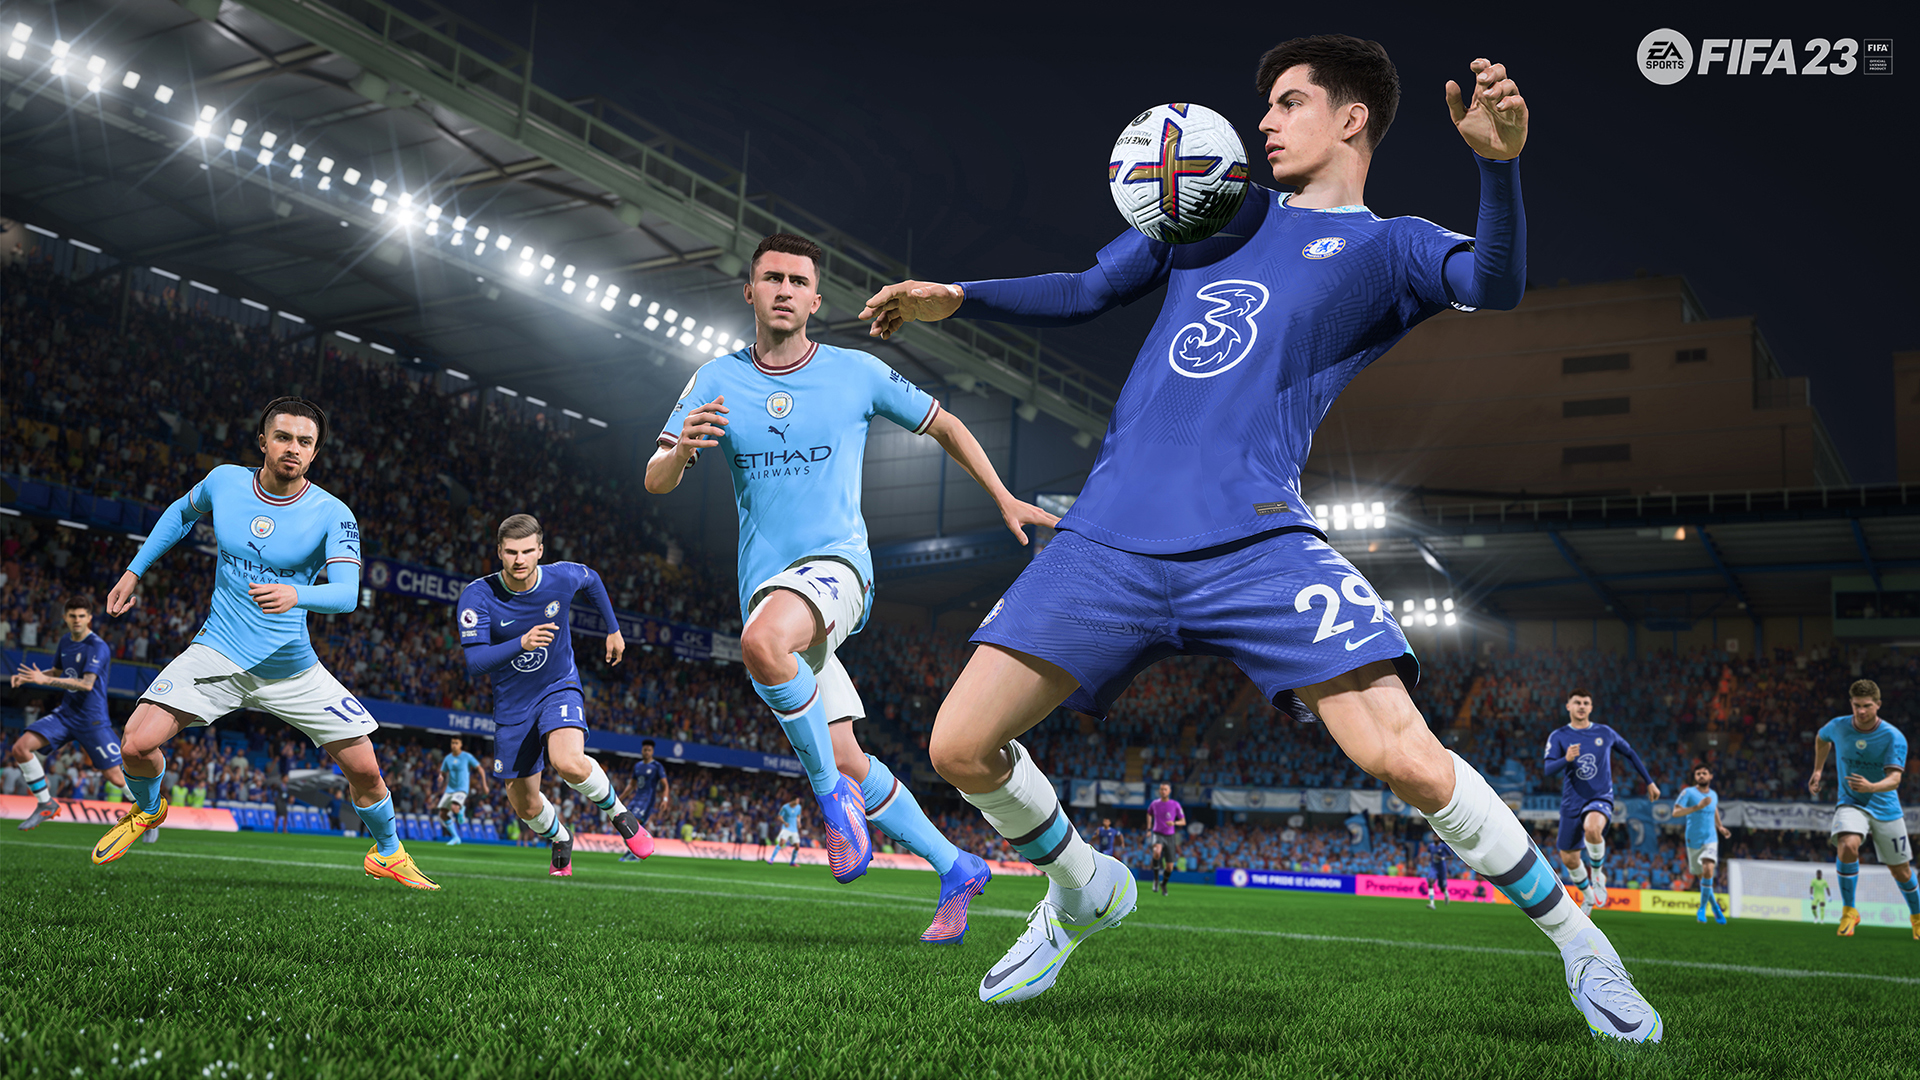 EA Sports FIFA 23 Delivers The Most Complete Interactive Football  Experience Yet, With Hypermotion2, Generational Cross-Play, Women's Club  Football, and Both Men's & Women's FIFA World Cups